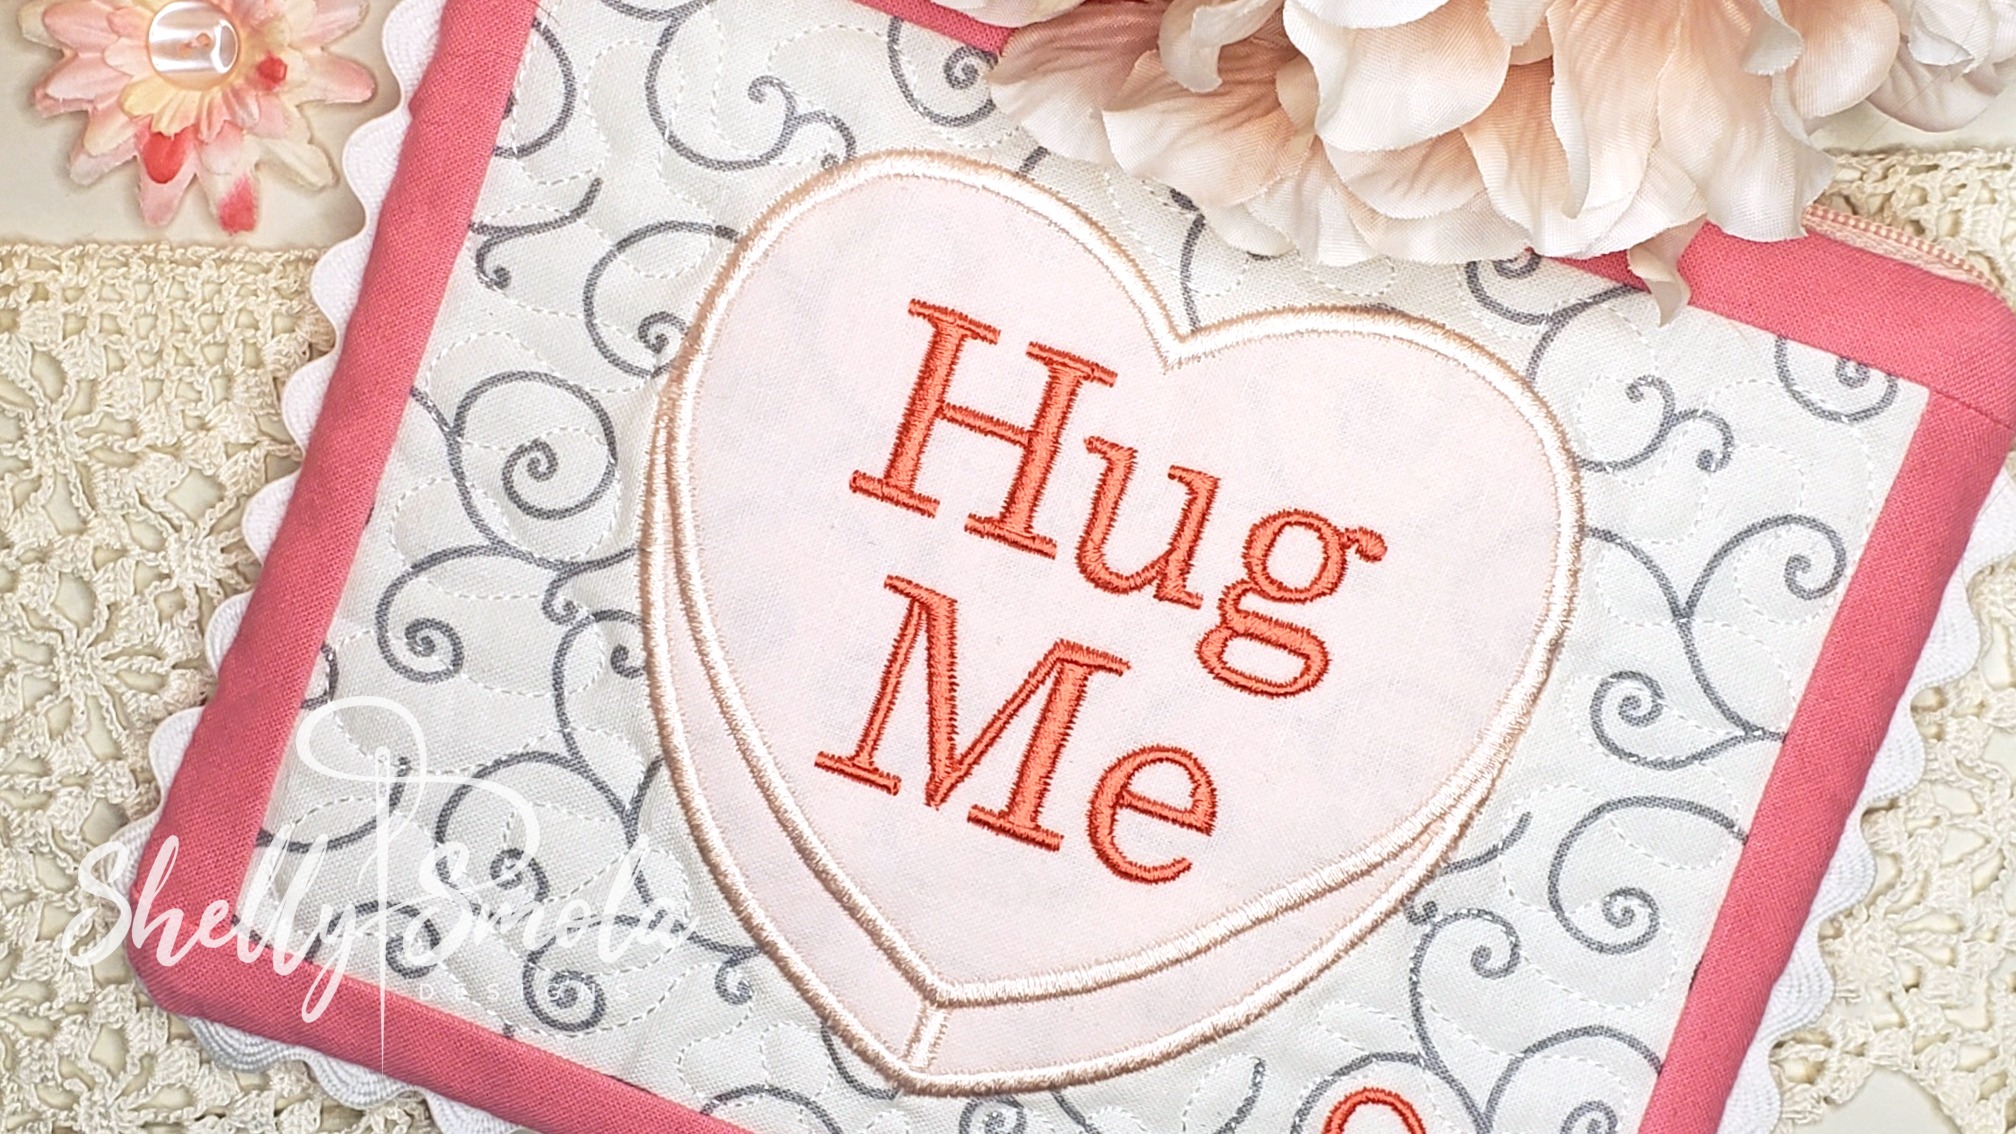 Hug Me Candy Heart by Shelly Smola